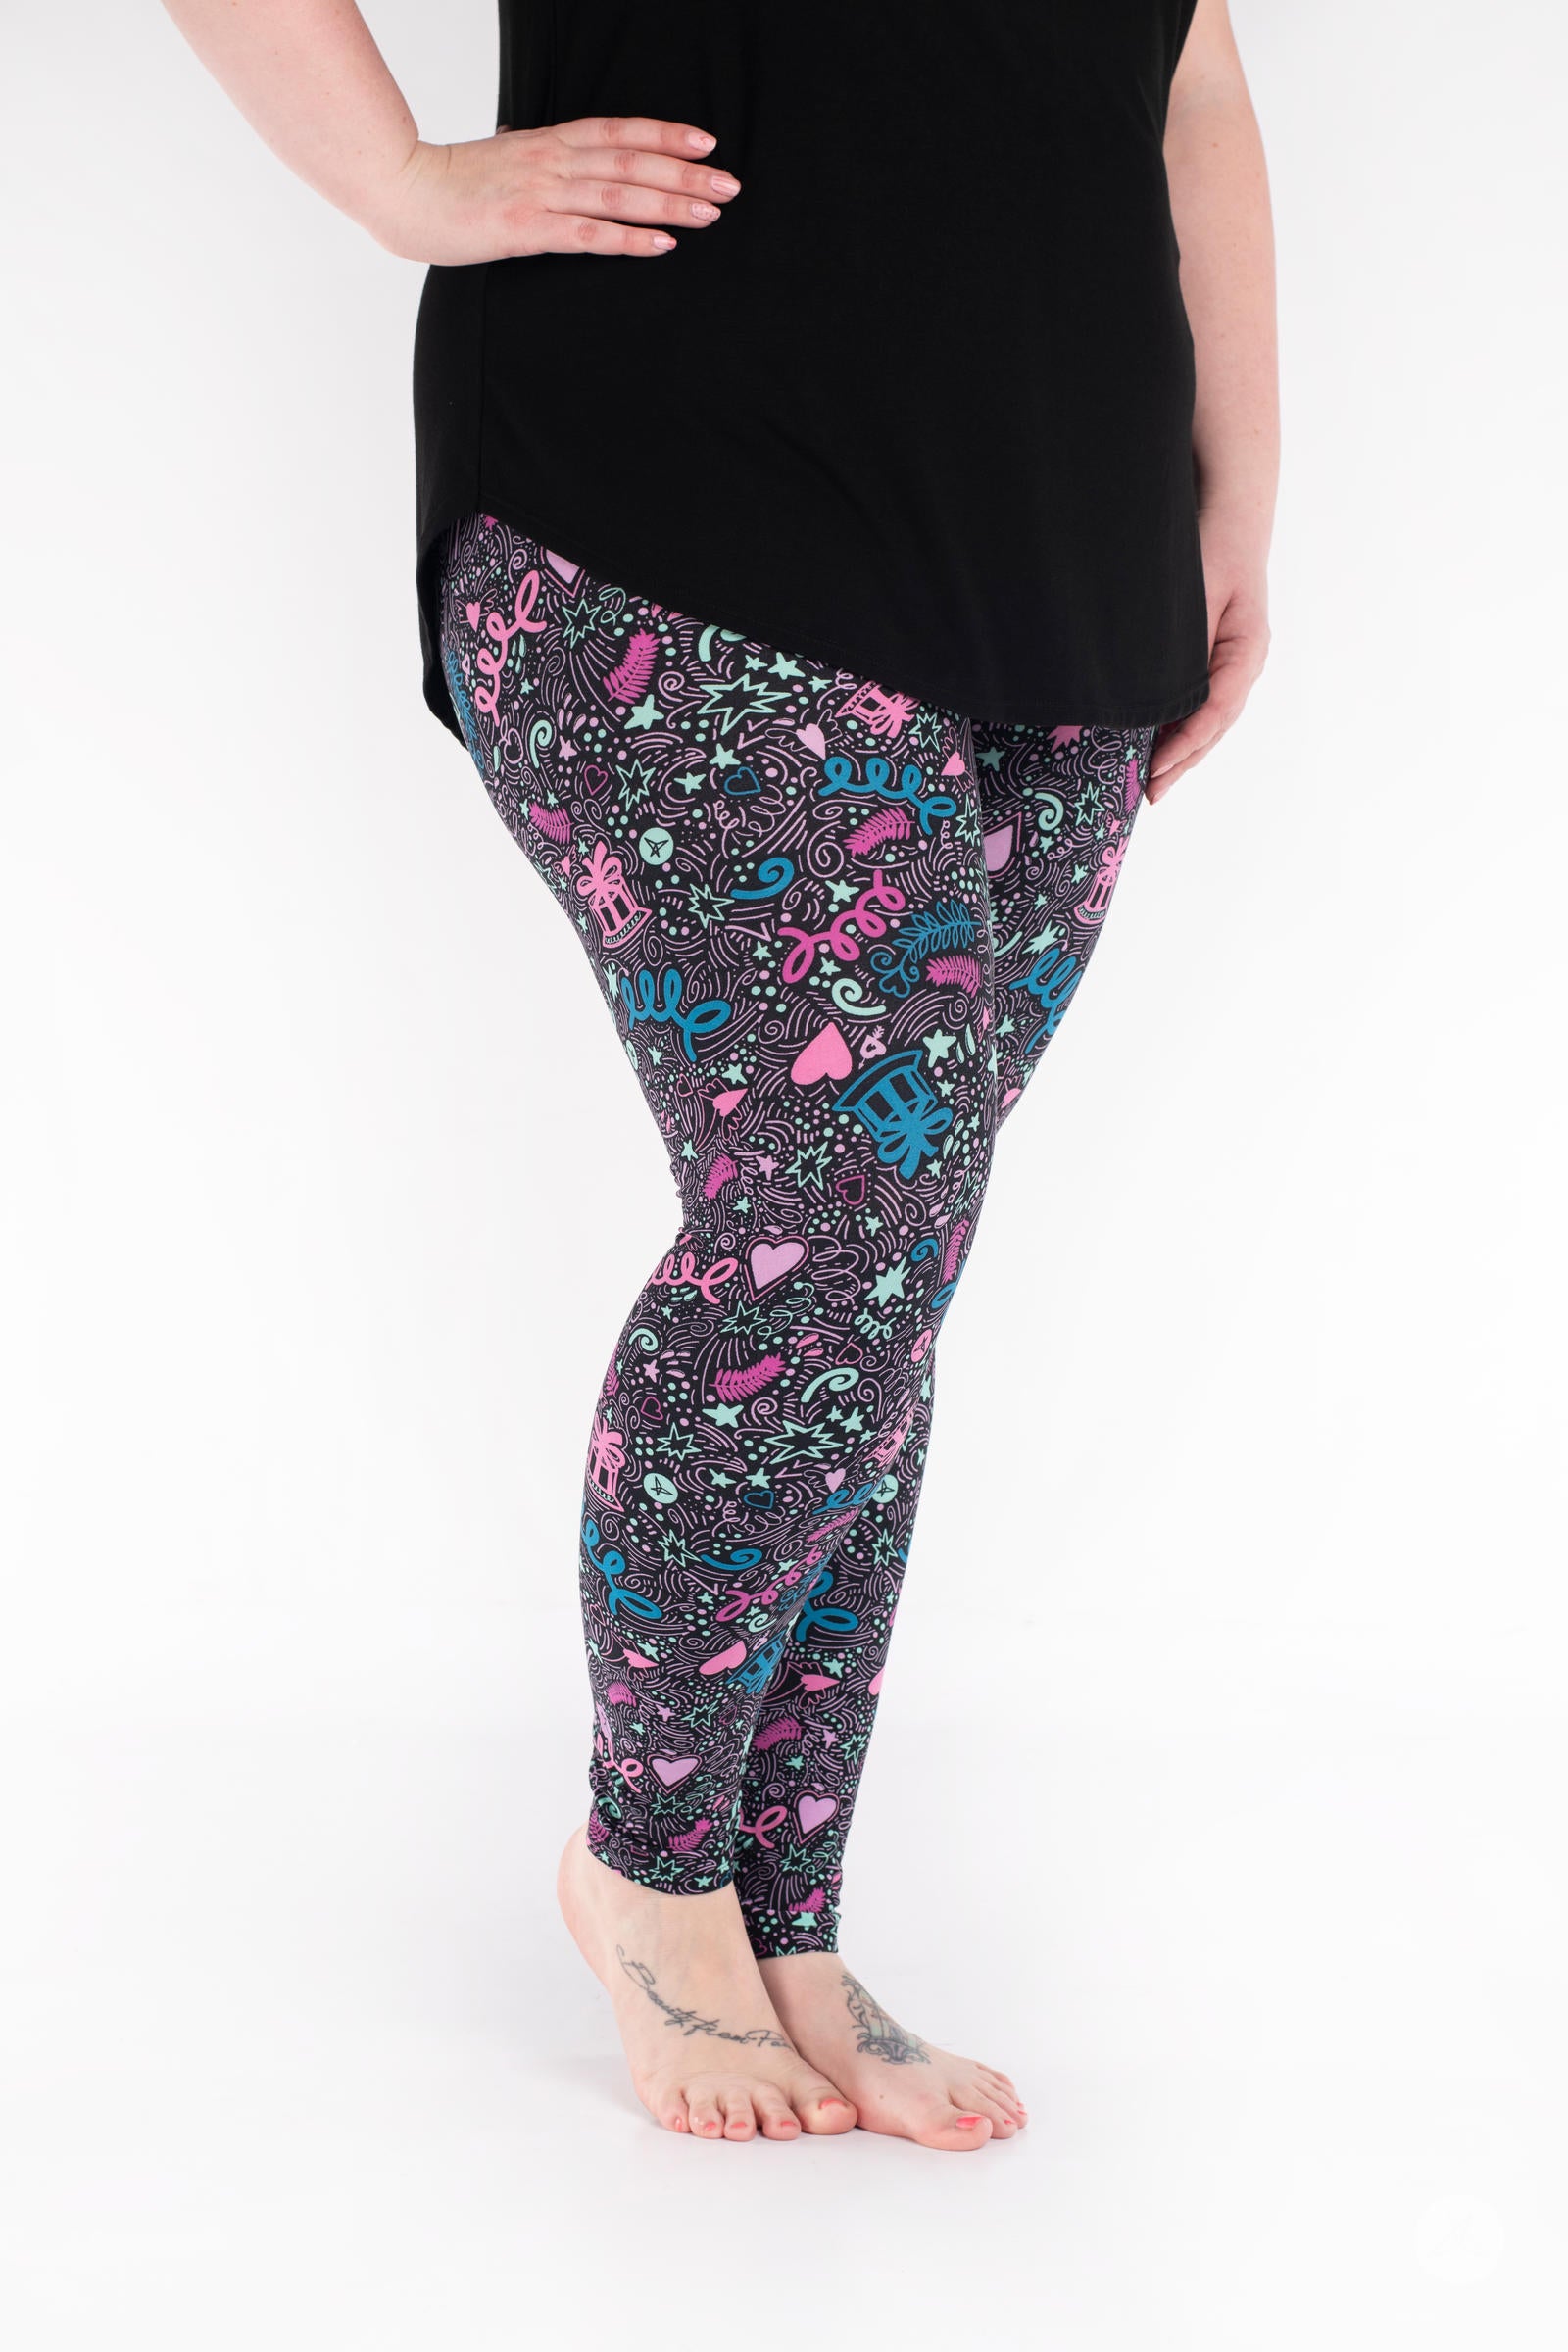 Red Floral Print Colorful High Waist Plus-sized Leggings 